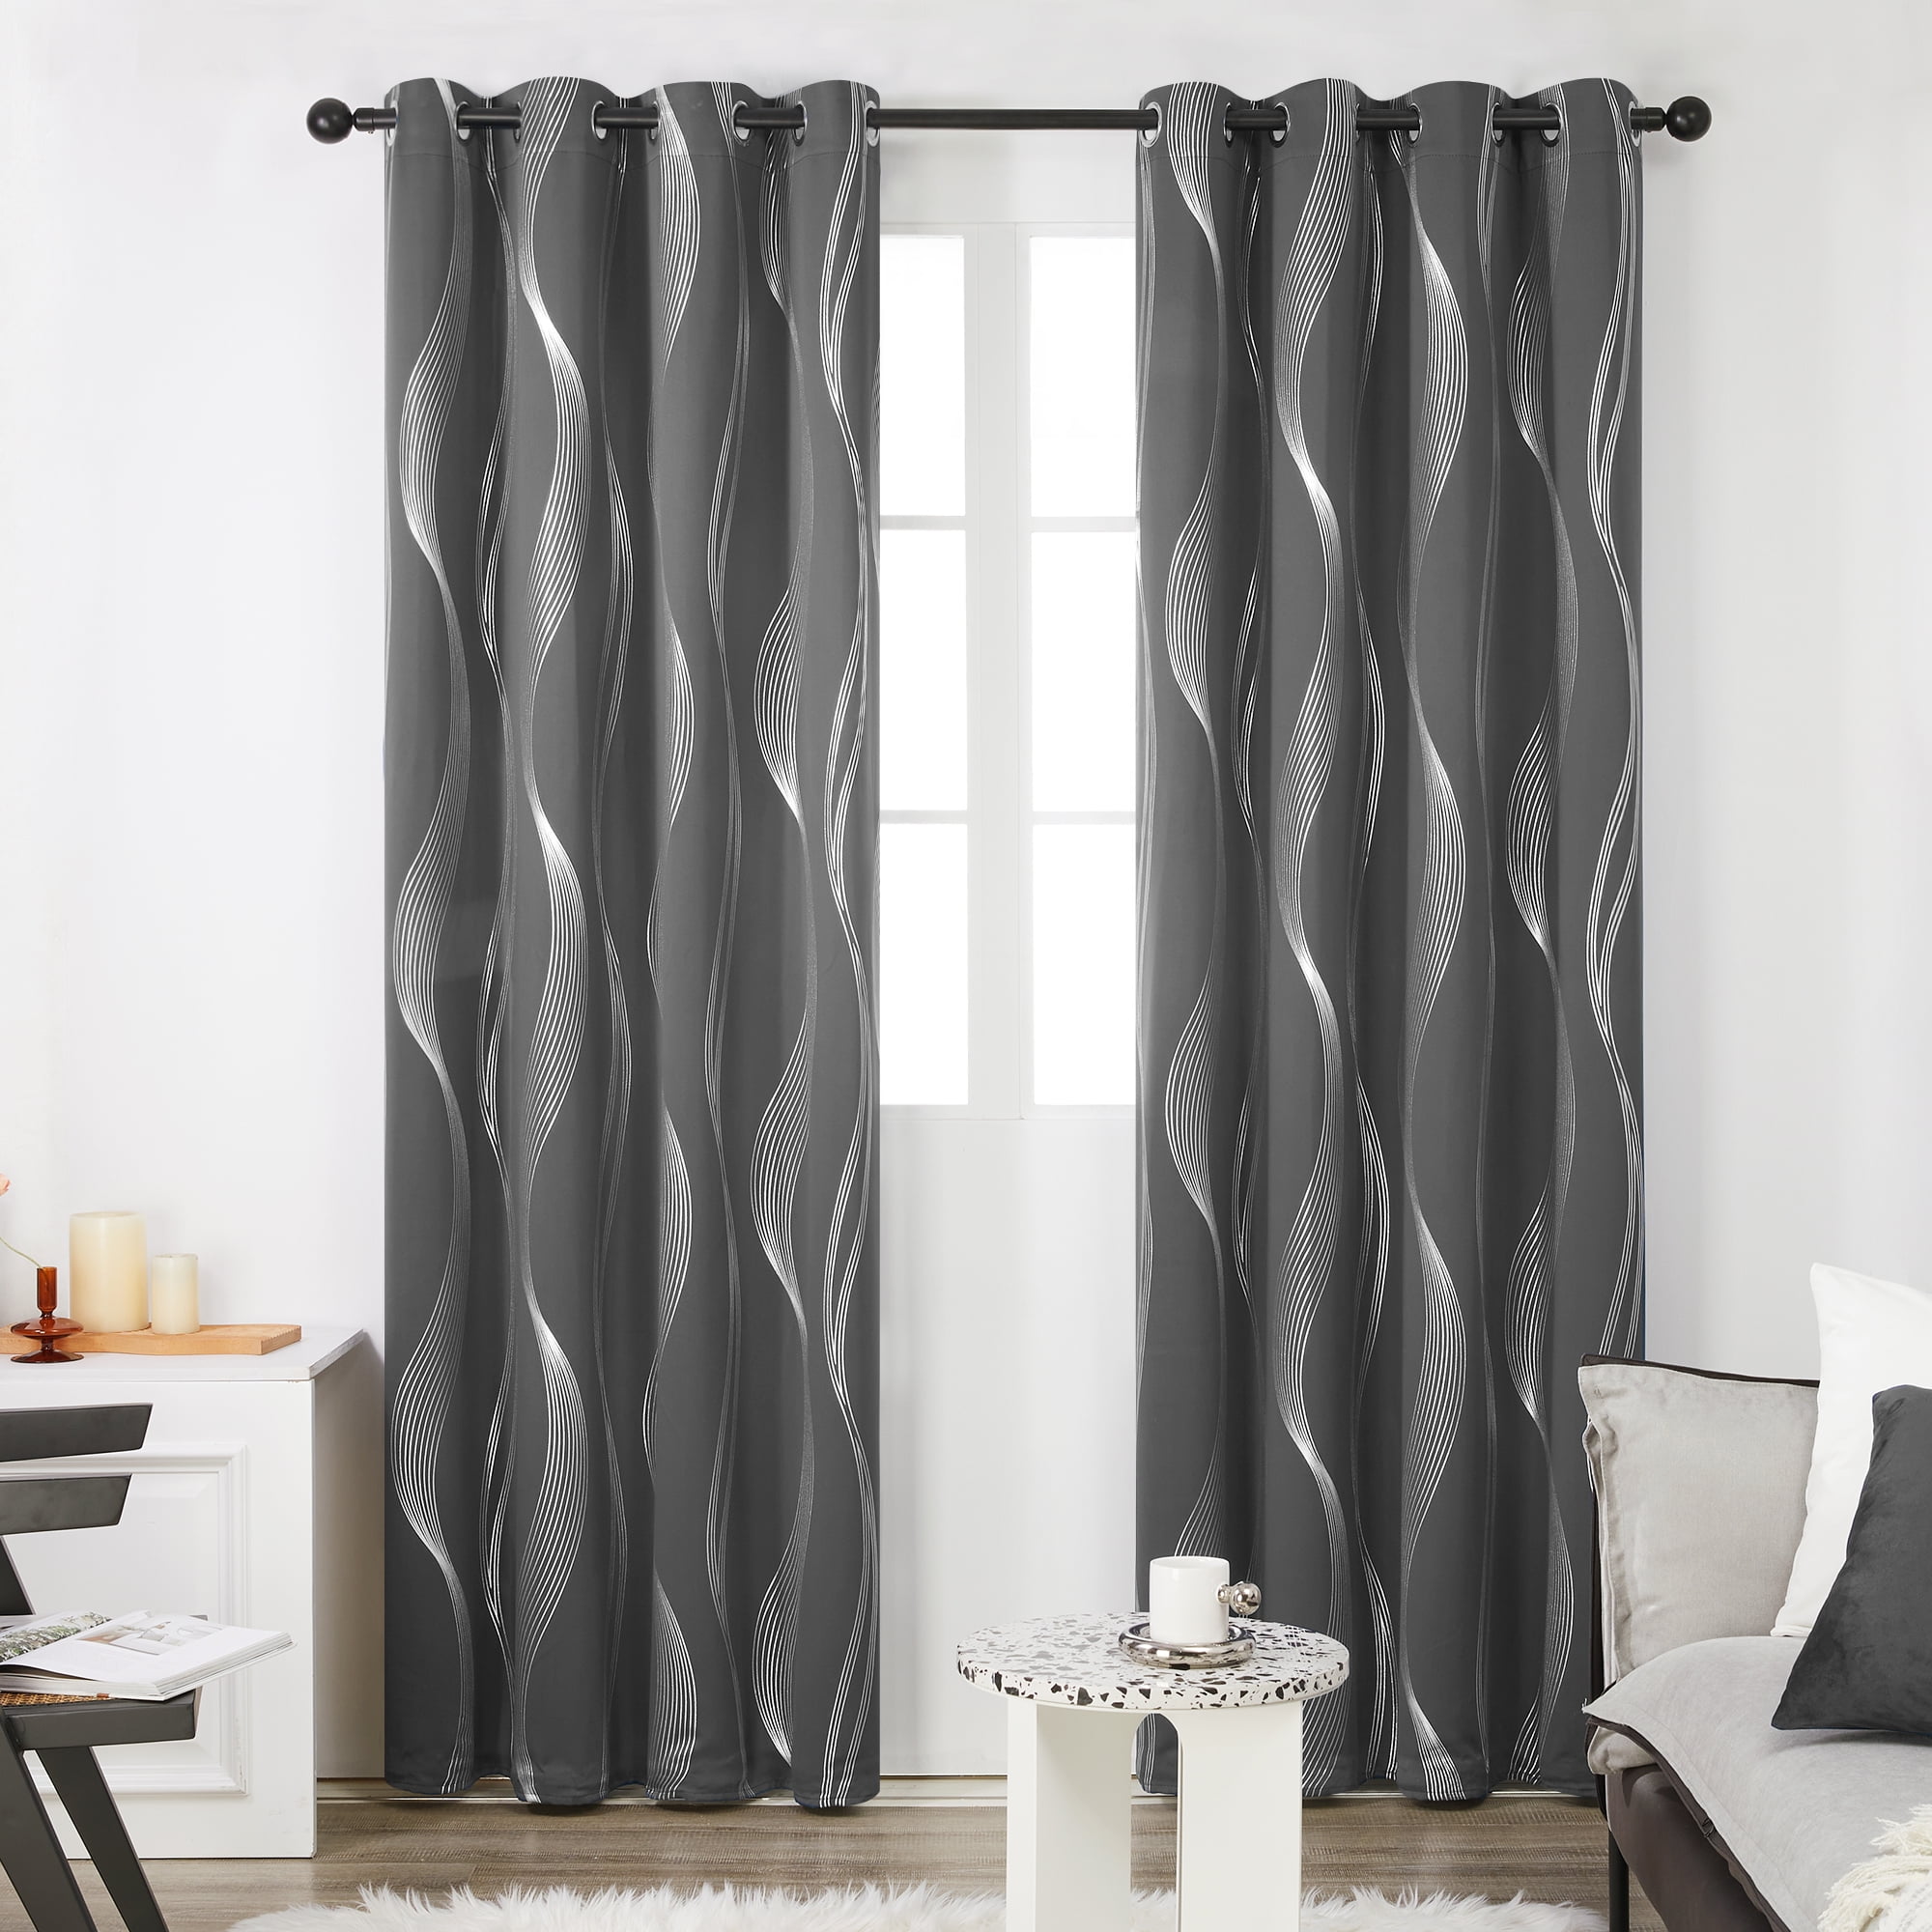 Deconovo Jacquard Luxurious Pattern Curtains with Rod Pocket Window Panels for Kids Room Grey-Wave 52X84Inch